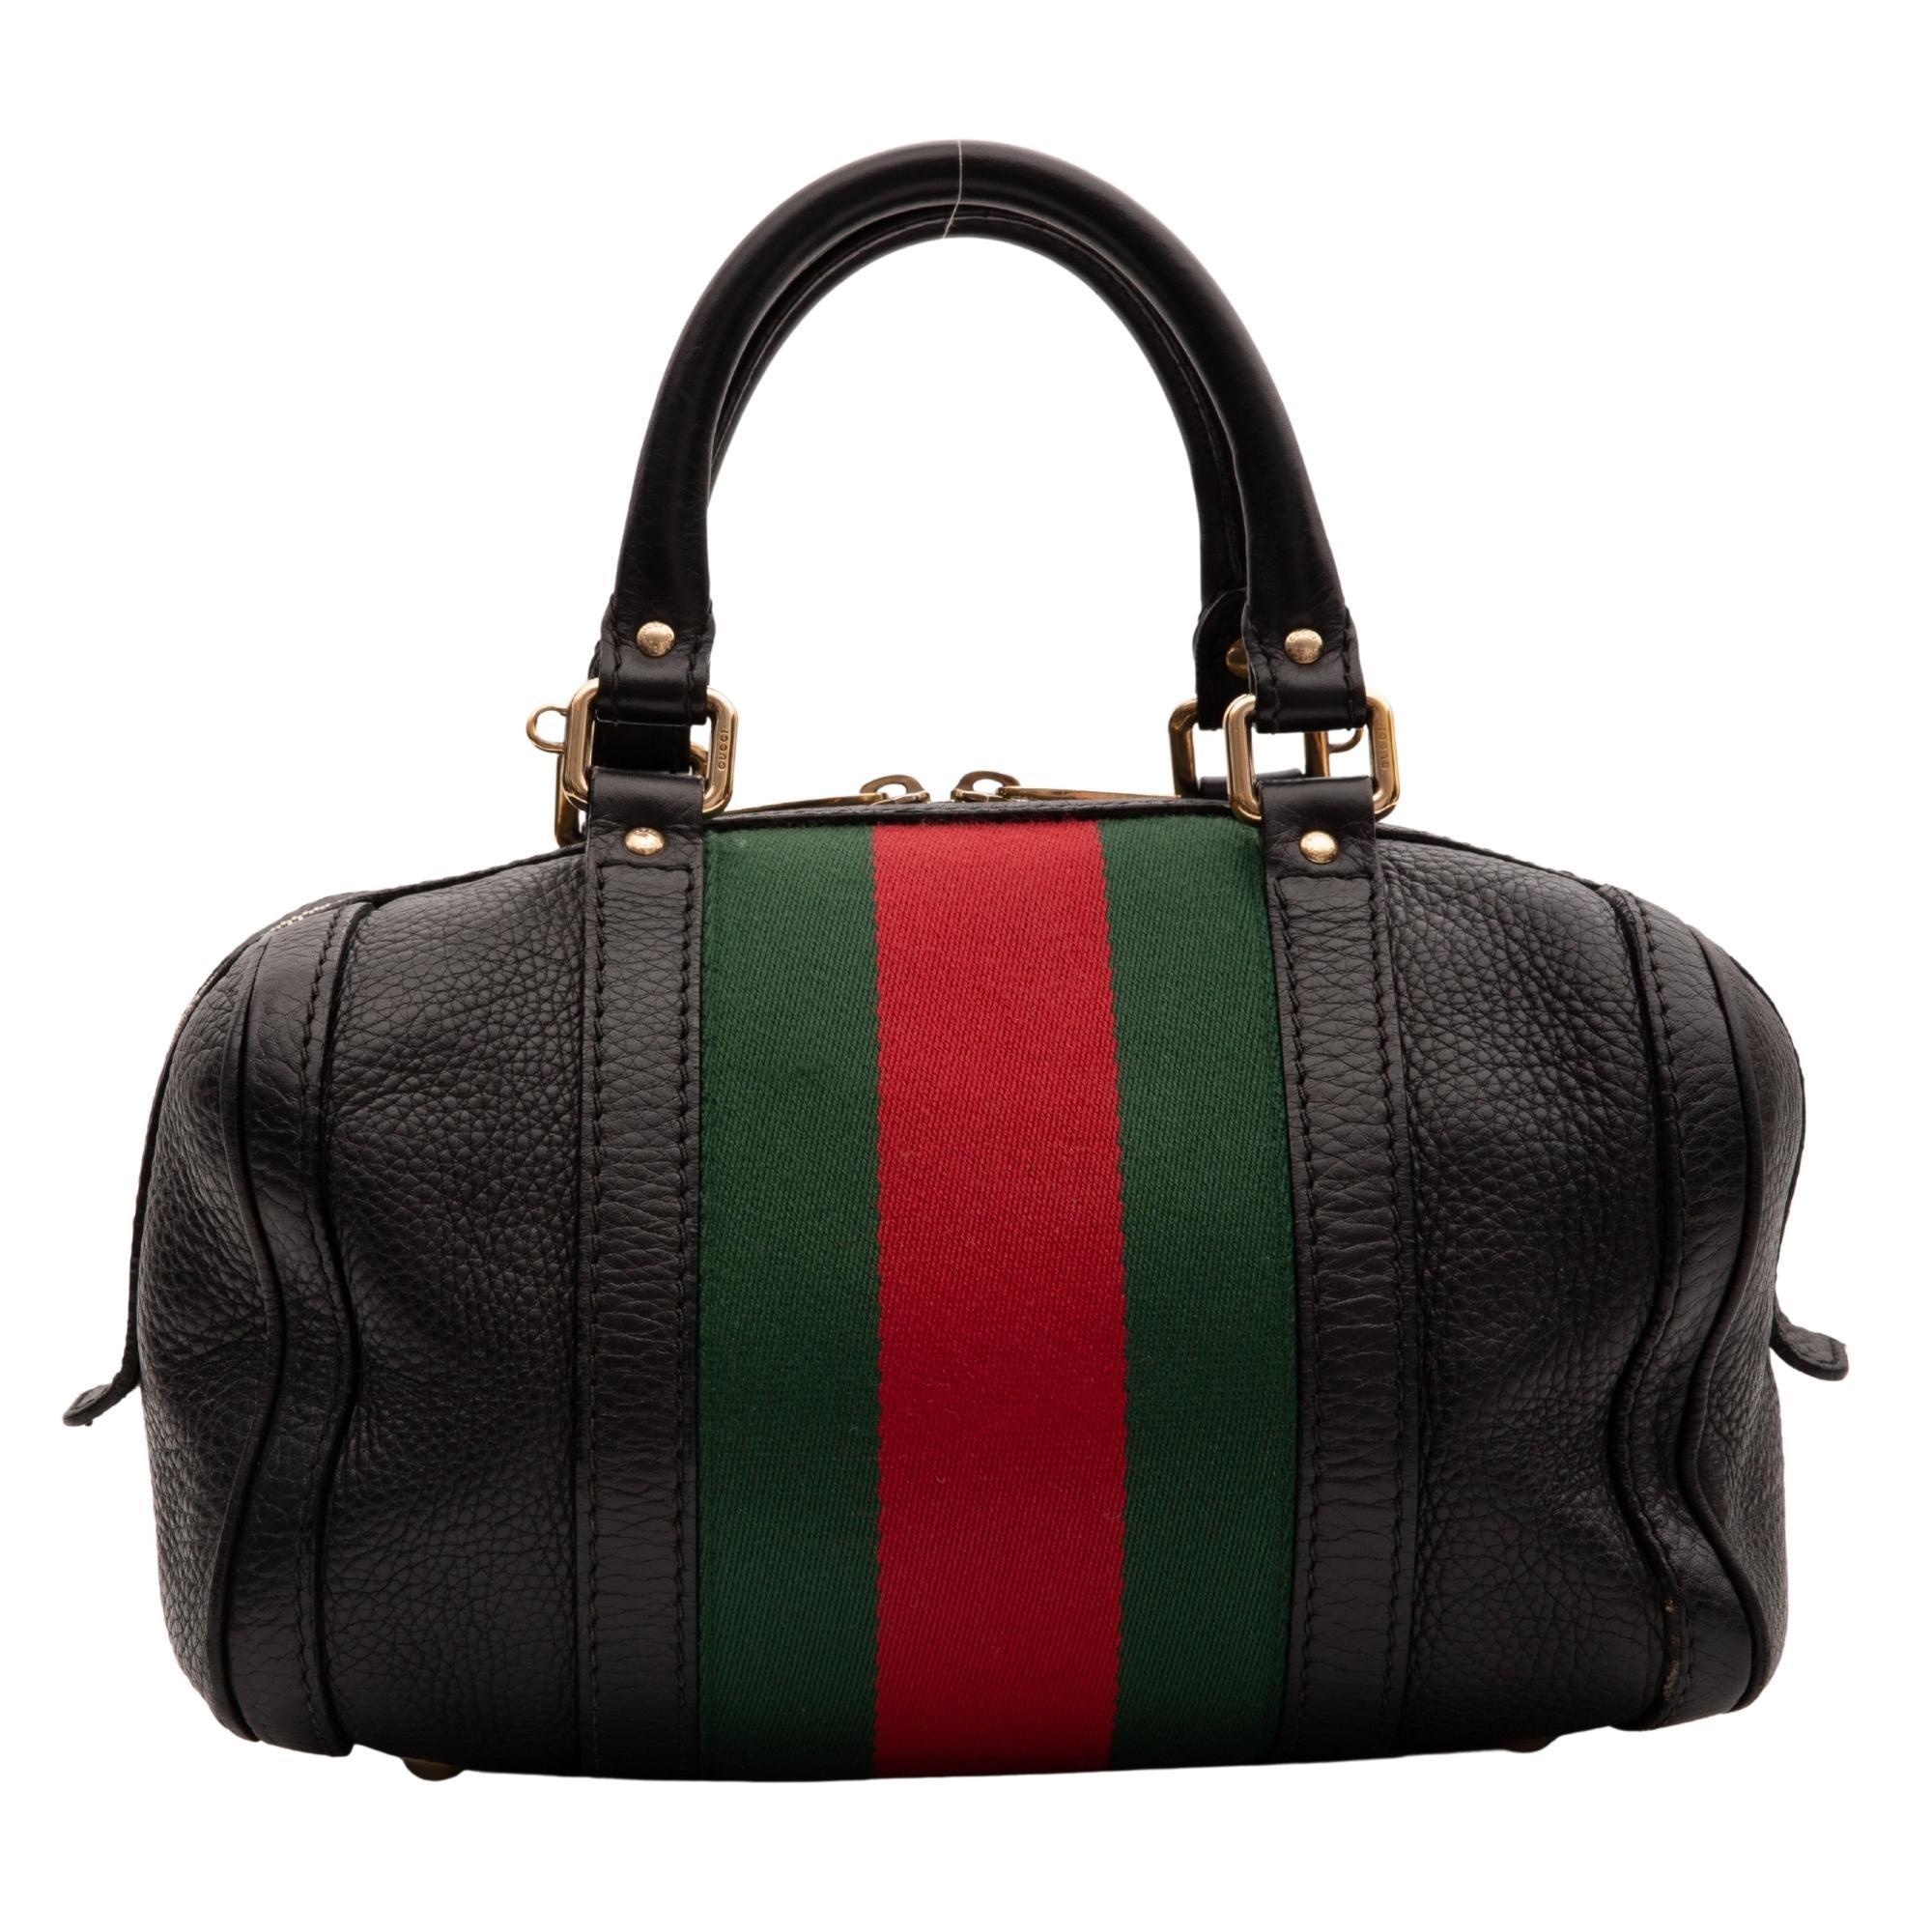 This Boston style bag is made of textured calfskin leather in black. The bag features a red and green canvas stripe around the girth of the bag, dual rolled leather top handles, brass hardware, top zip closure with double zip tabs and a beige fabric